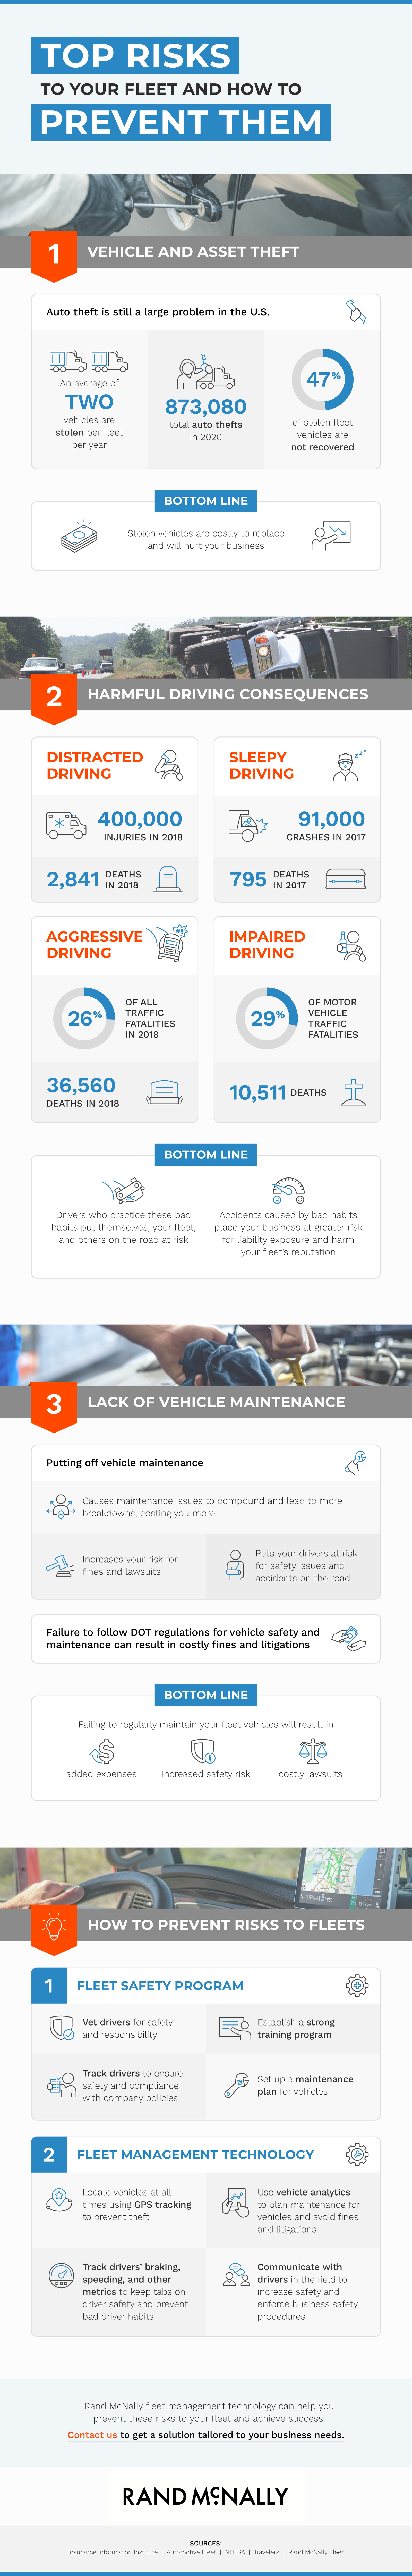 Top risks to your fleet and how to prevent them - Infographic